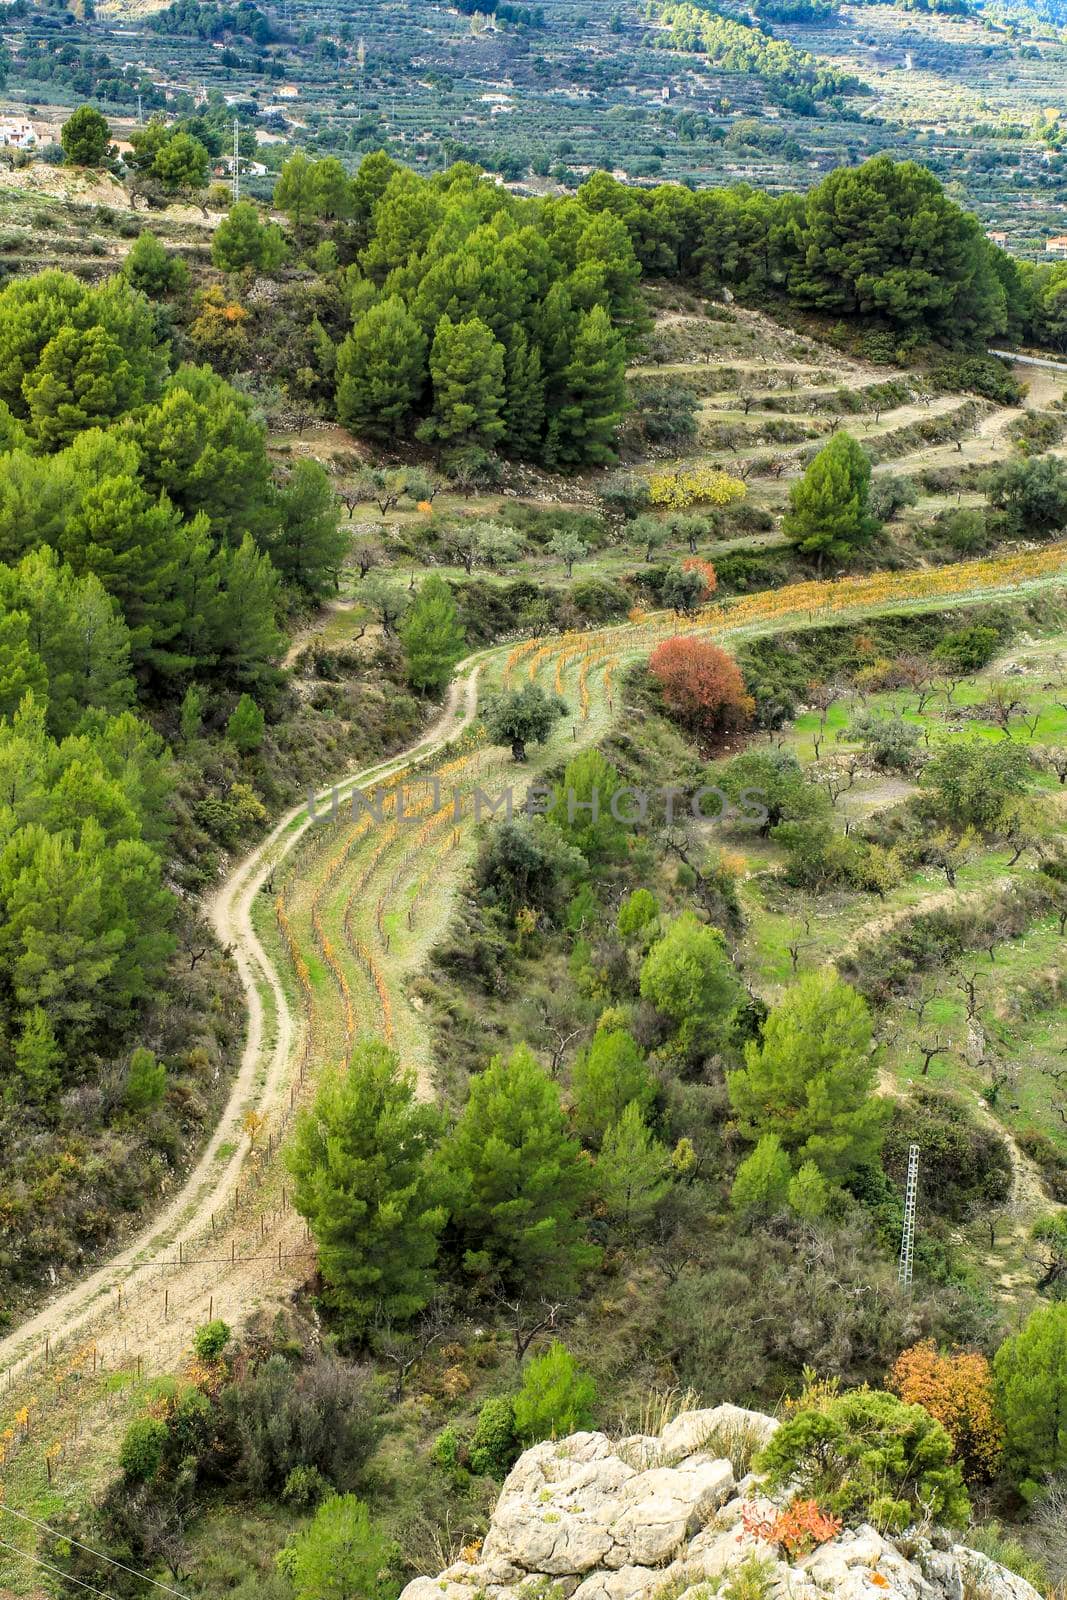 Colorful Vineyard and aldmond plantation in the mountain in Guadalest village, Alicante, Spain